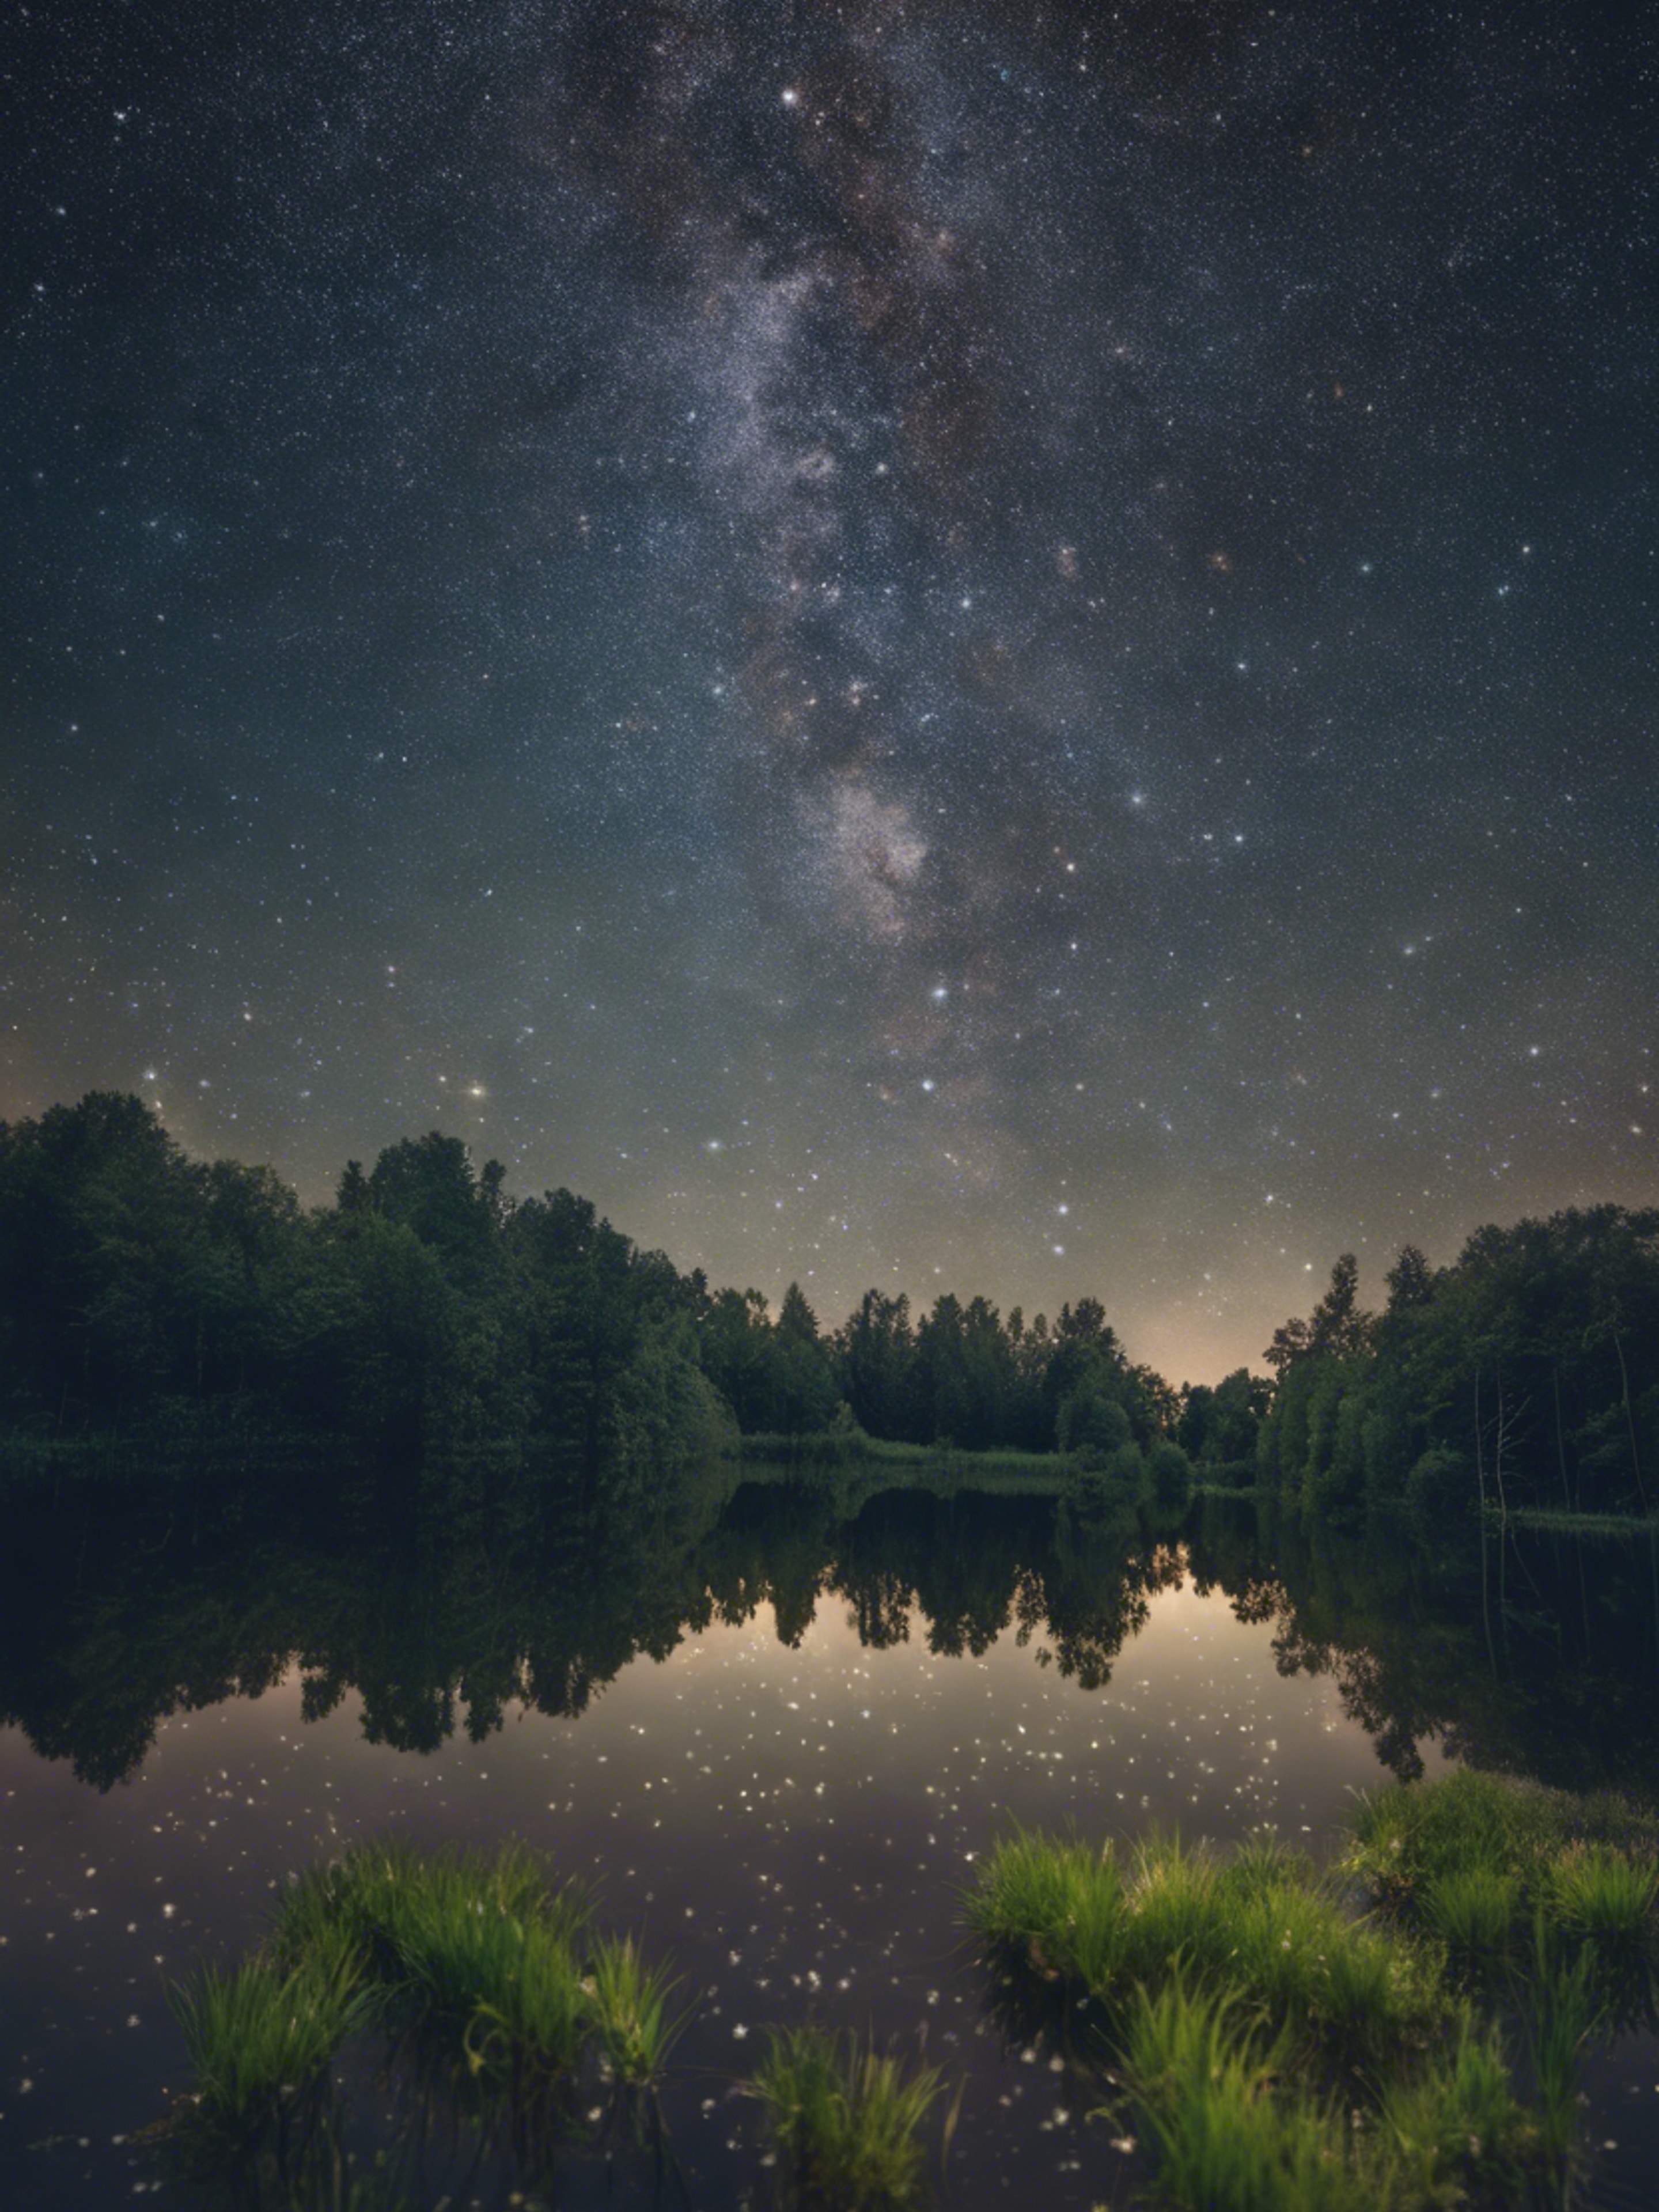 A starry summer night over the pristine waters of a pond located deep in a French country forest. Hintergrund[c6d93c2a737c4012904e]